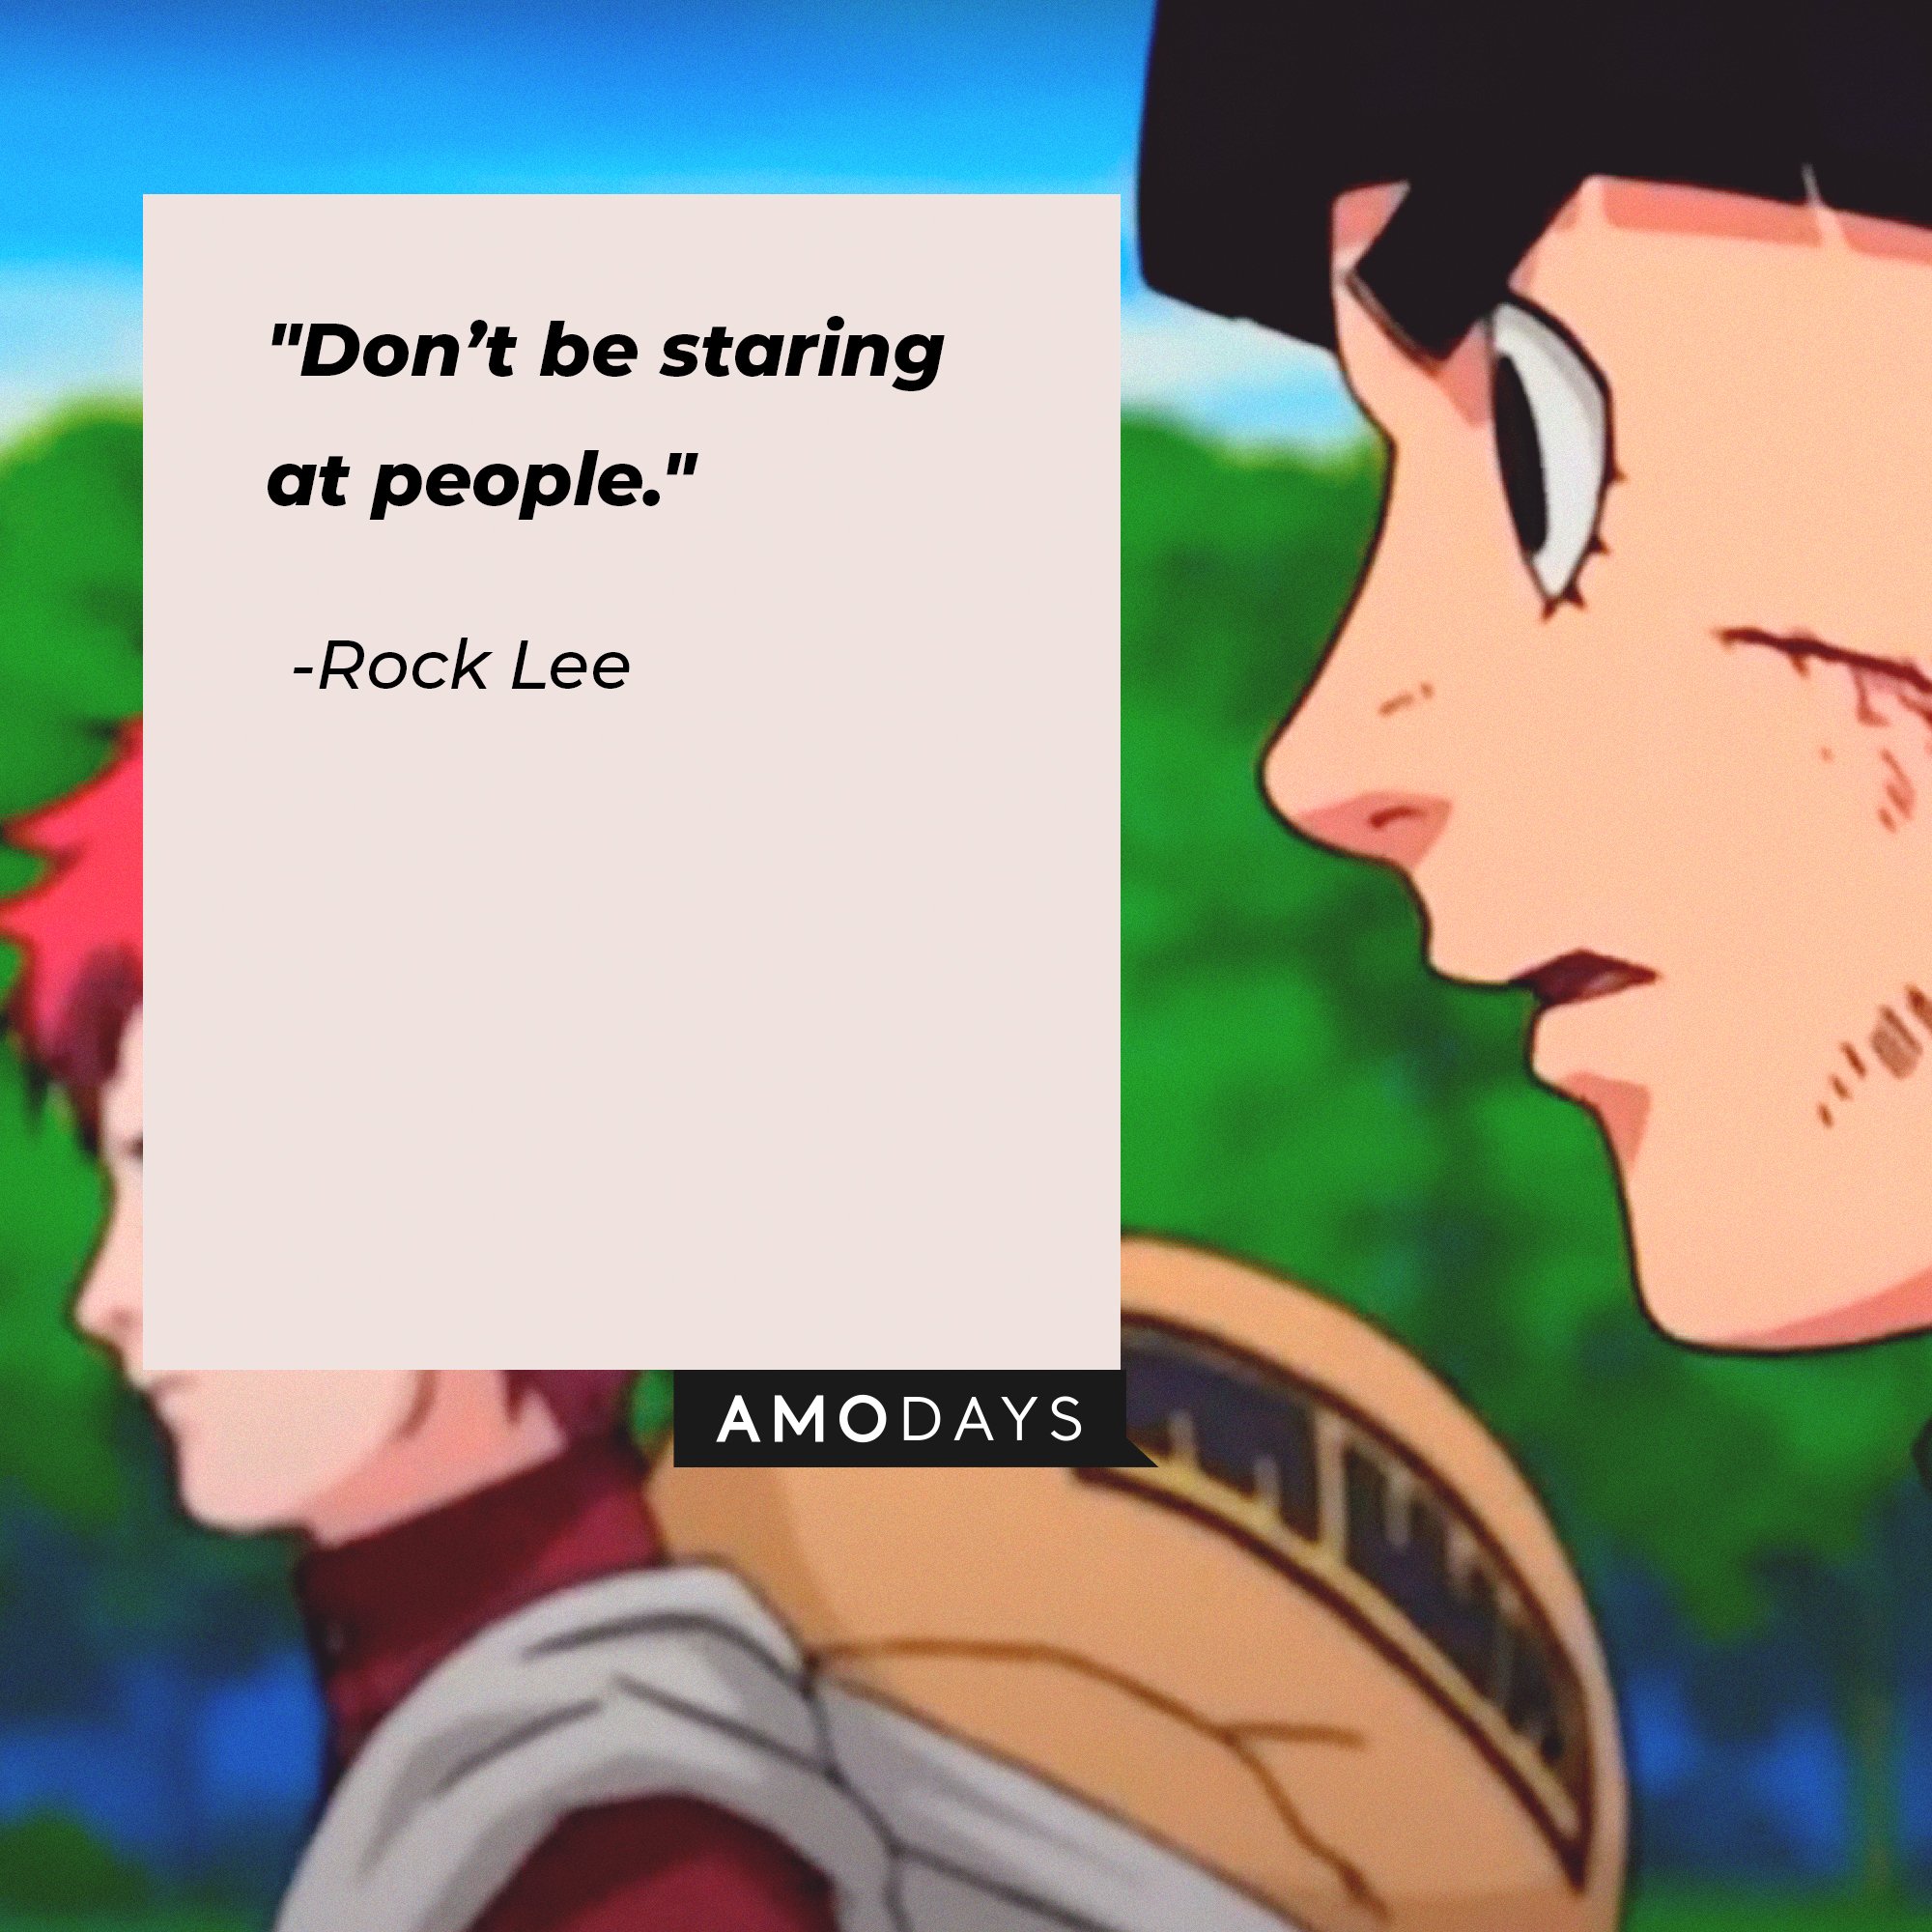 Rock Lee’s quote: "Don't be staring at people." | Image: AmoDays